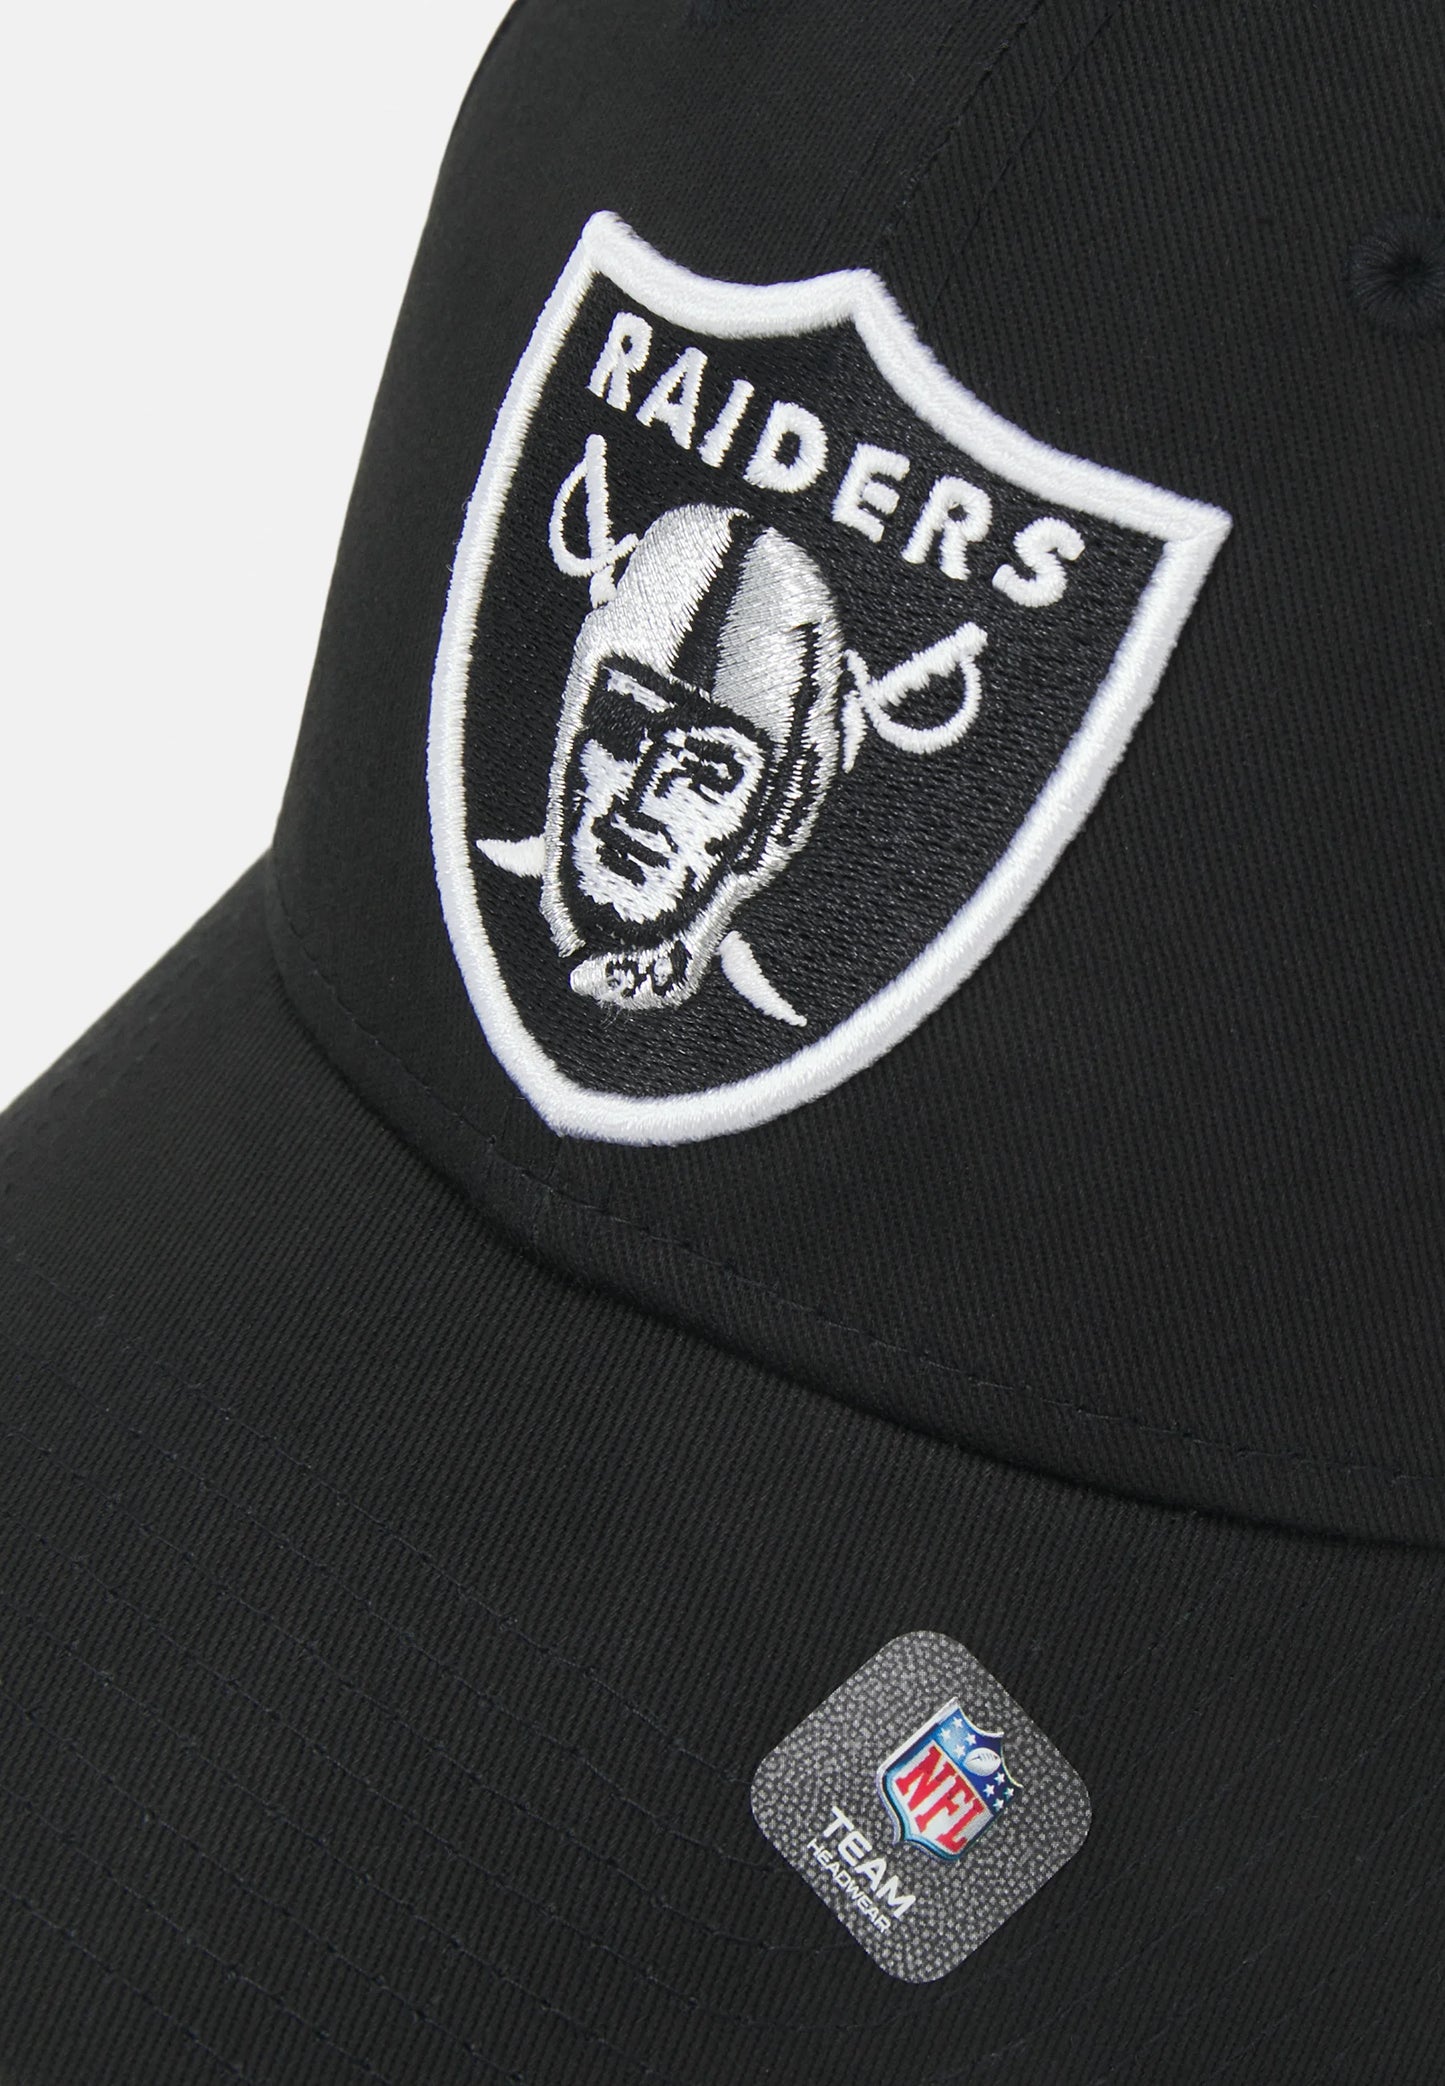 New Era TEAM SIDE PATCH 9FORTY® UNISEX - Cappellino